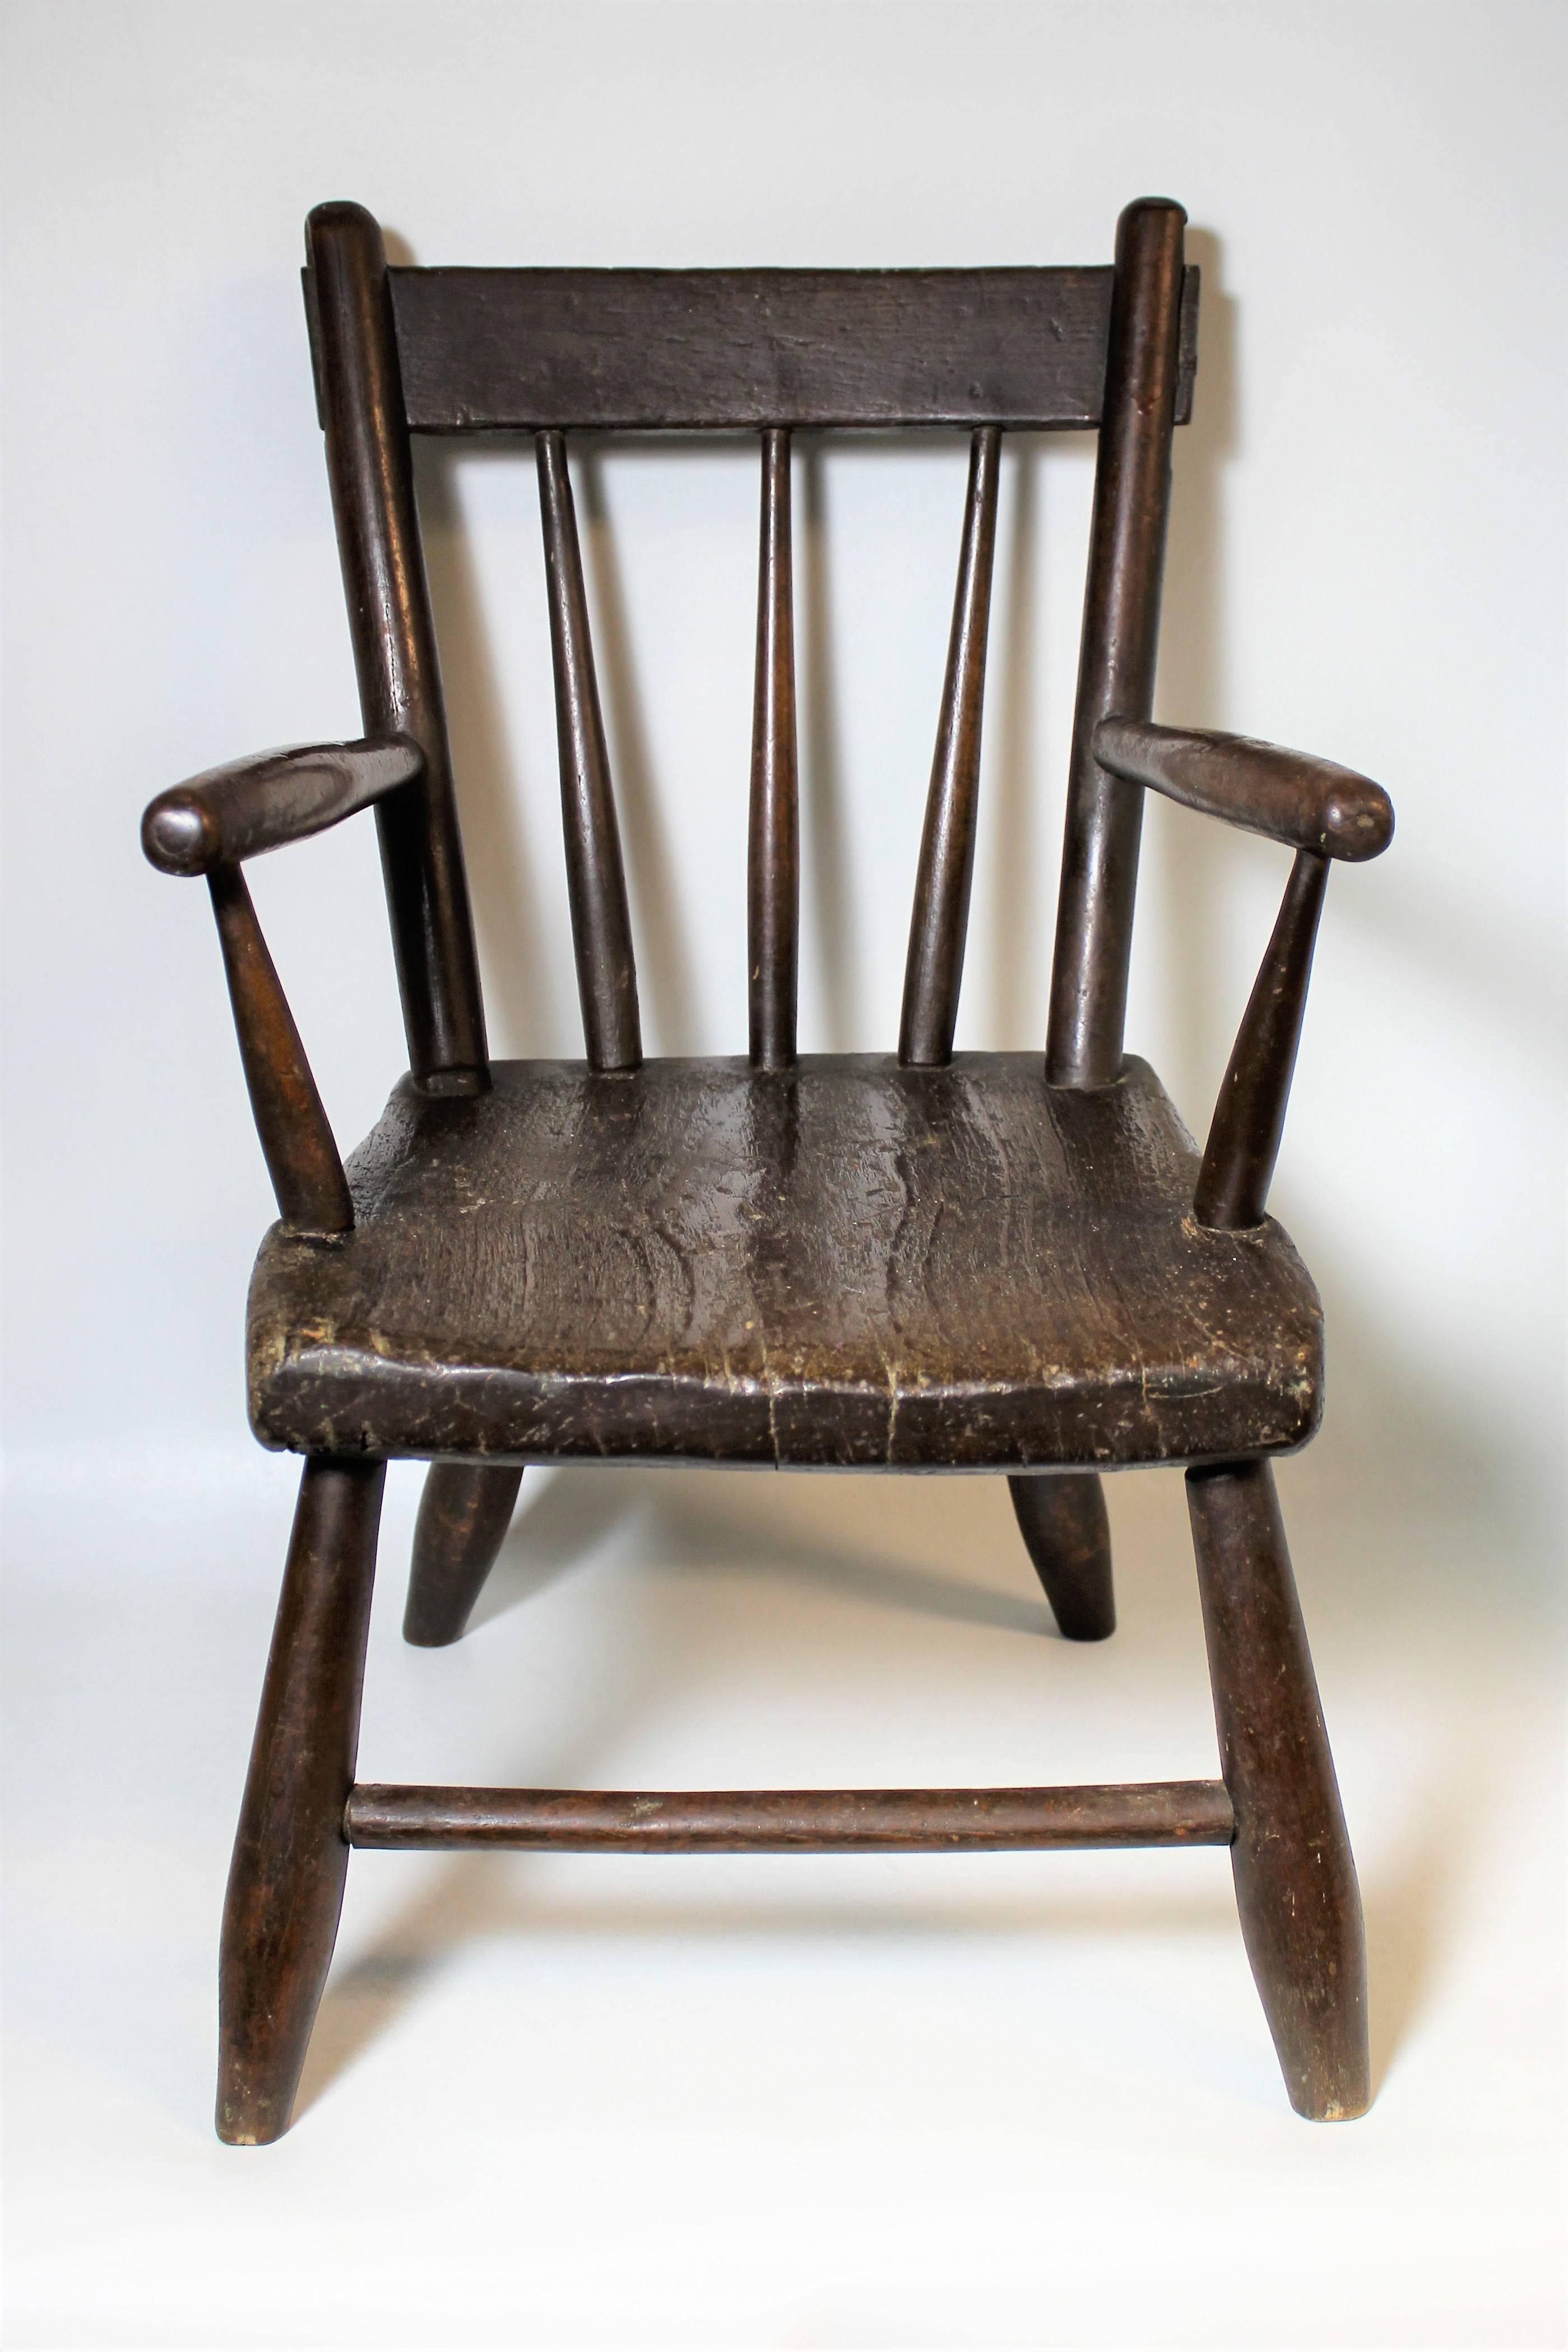 Early 19th century child's windsor chair.